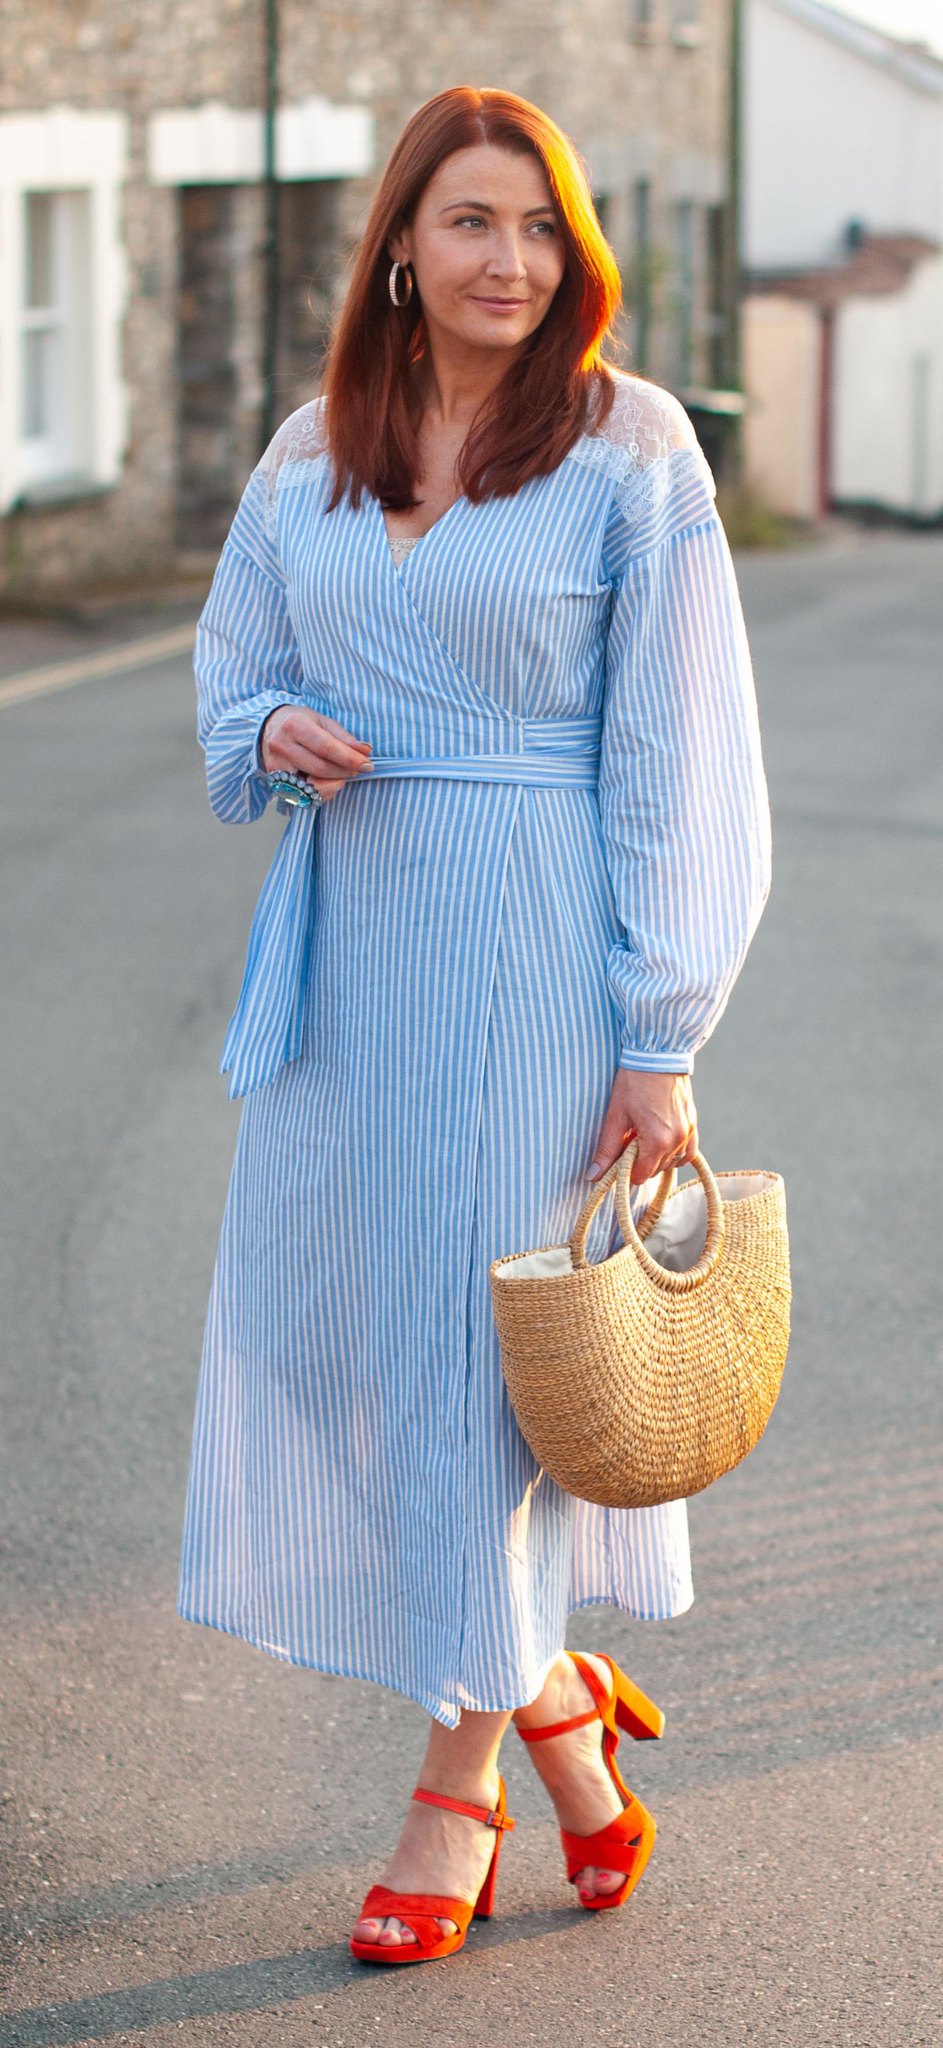 A Classic Summer Outfit of Blue and White Stripe Cotton \ Mango stripe cotton dress with lace panel \ tomato red block heel sandals \ straw basket bag | Not Dressed As Lamb, over 40 style